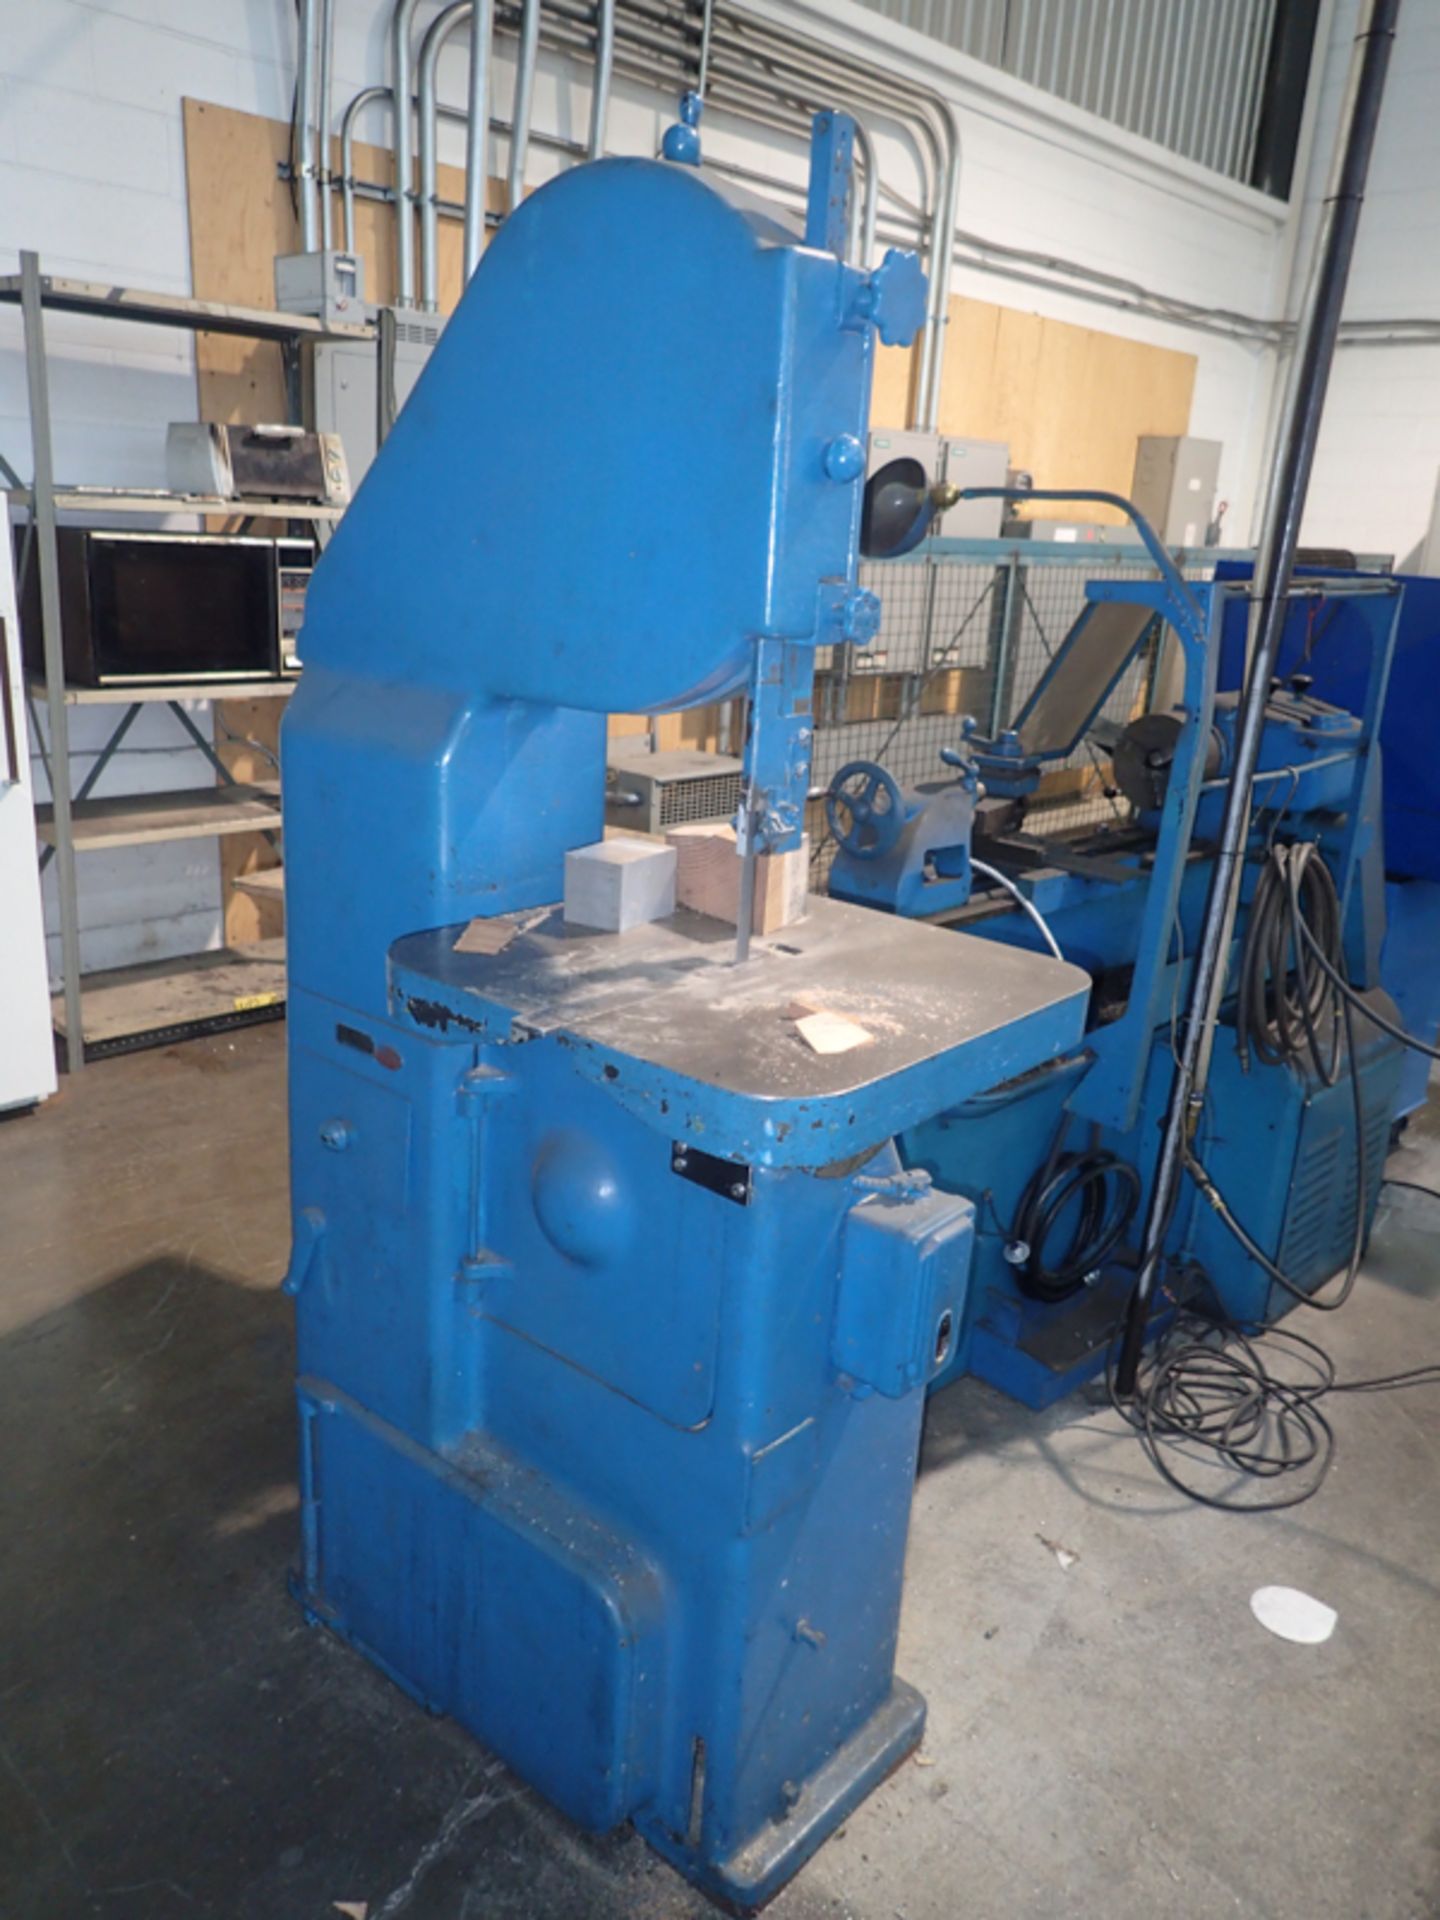 GROB 13" VERTICAL BAND SAW - Image 2 of 3